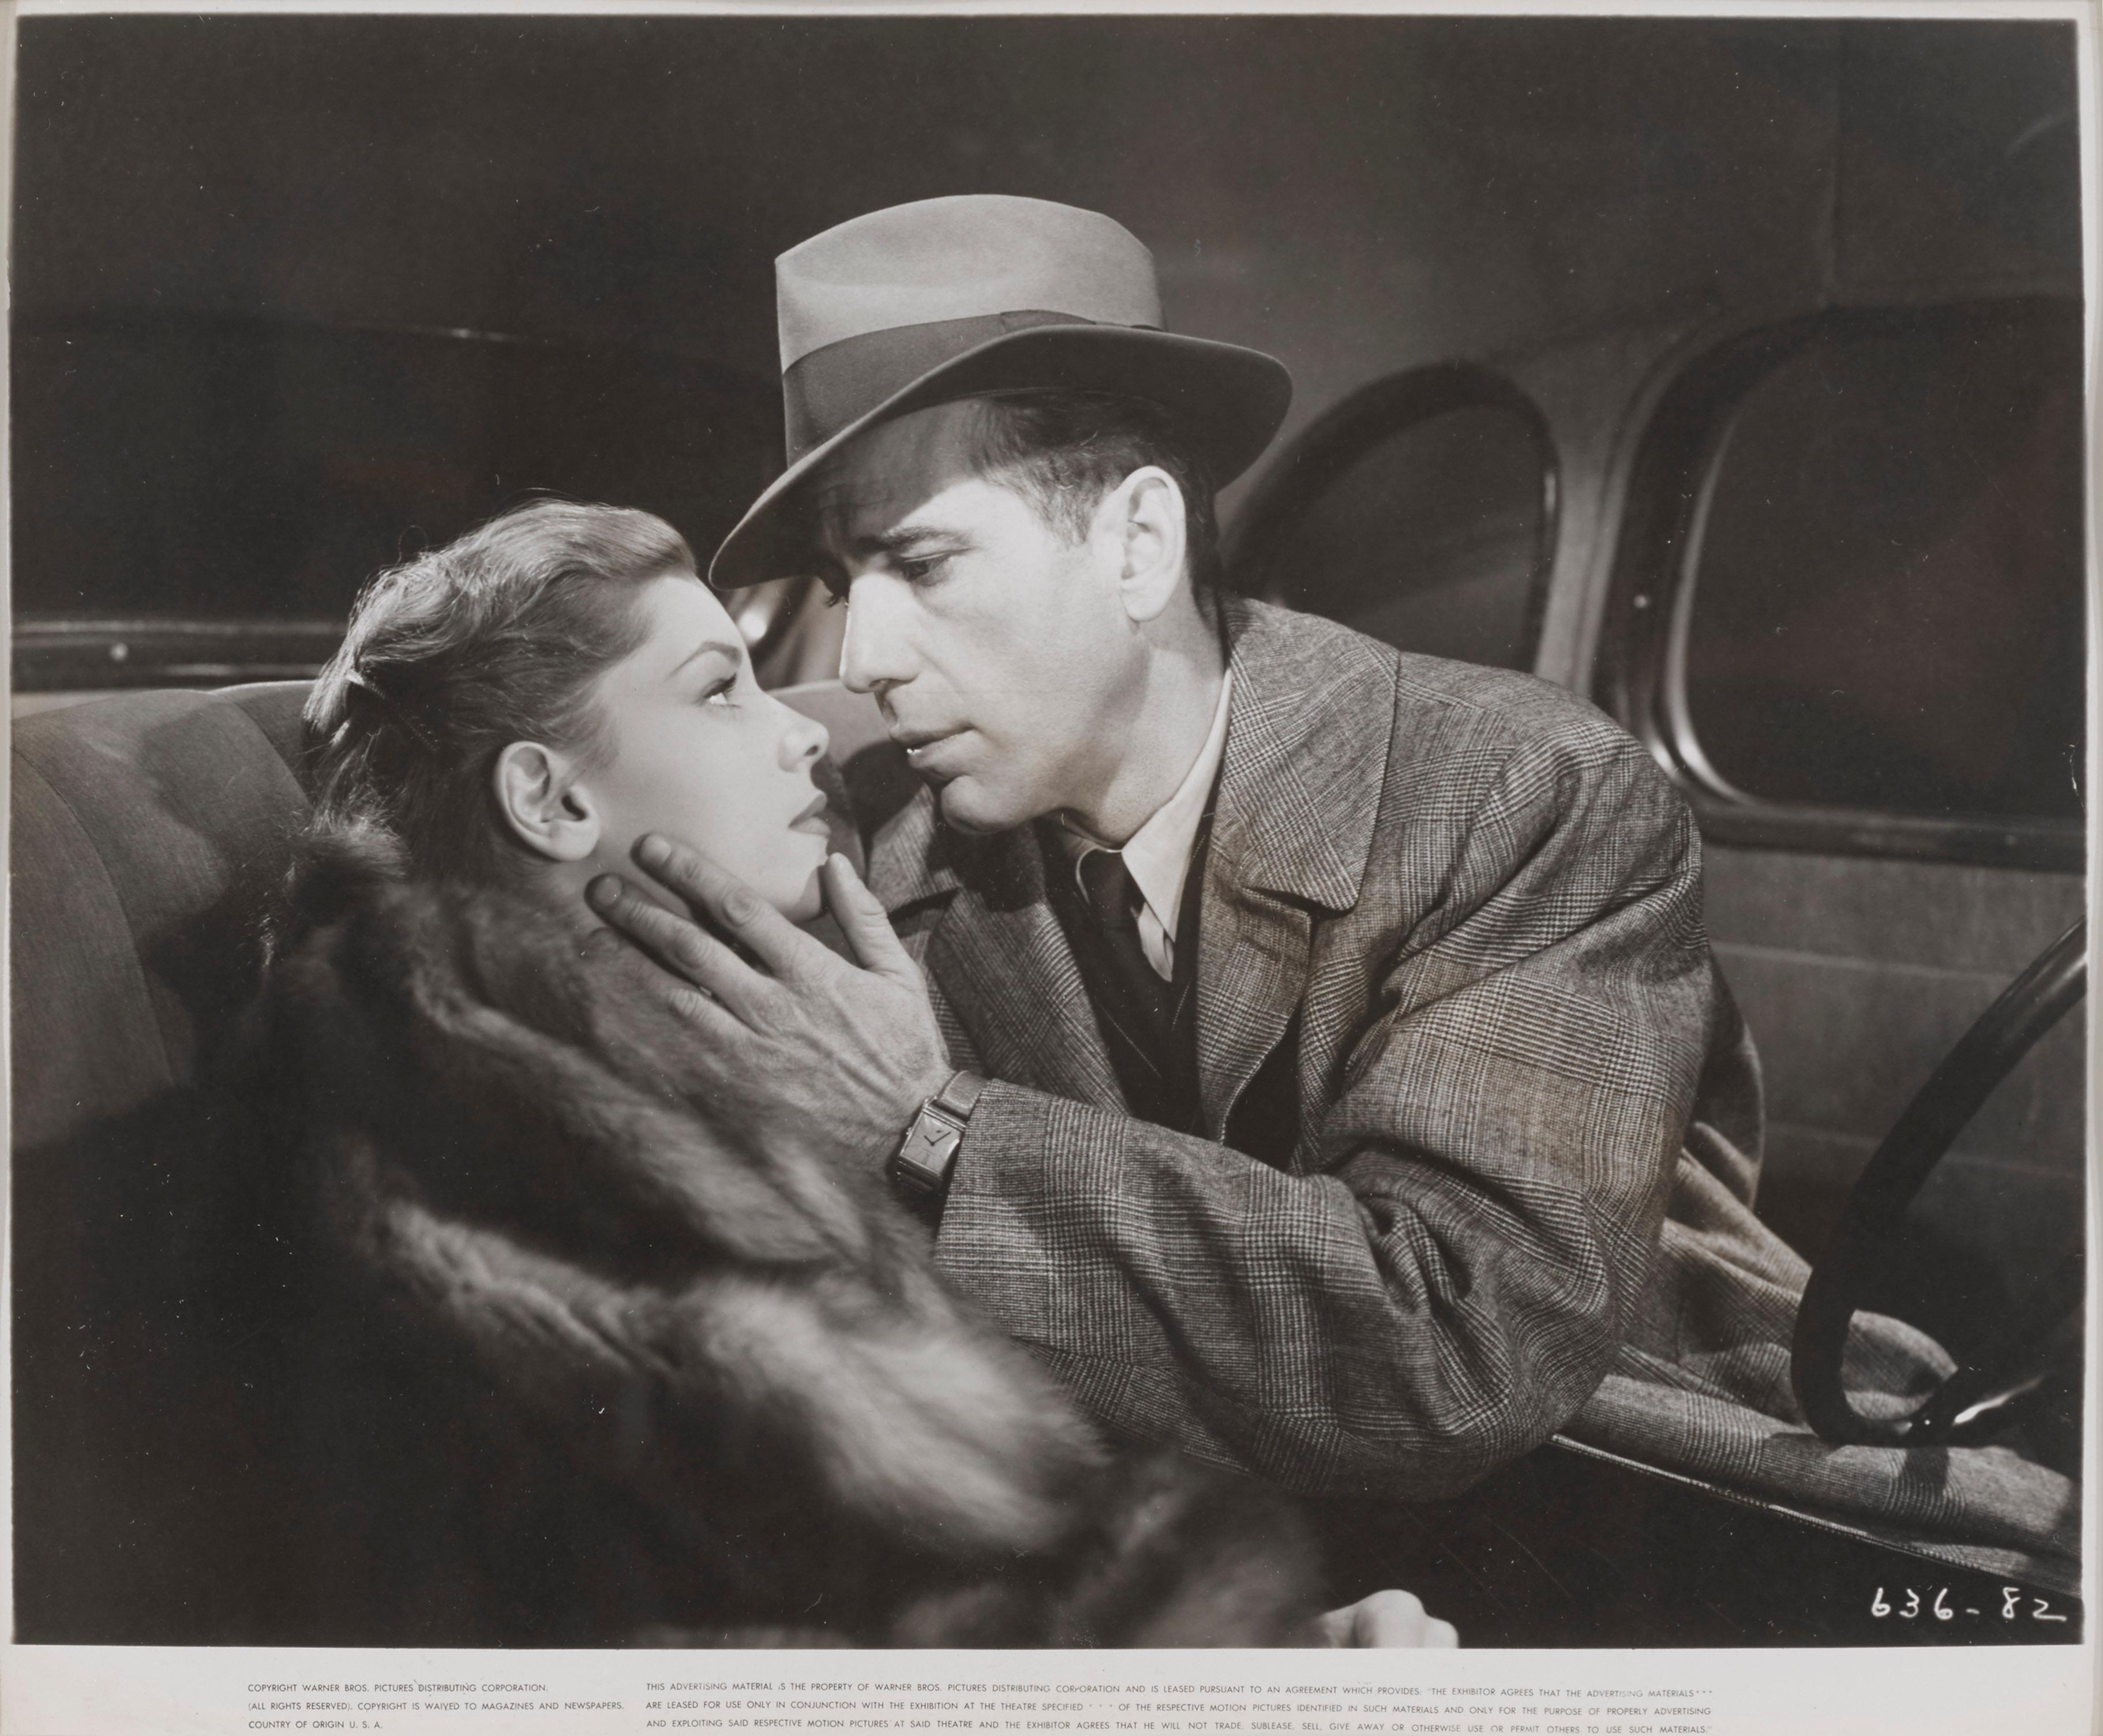 Original US photographic production still for Howard Hawks 1946 Film Noir staring Humphrey Bogart and Lauren Bacall. Bogart plays private detective Philip Marlowe It is now considered one of the great Film-Noir titles. This piece is conservation